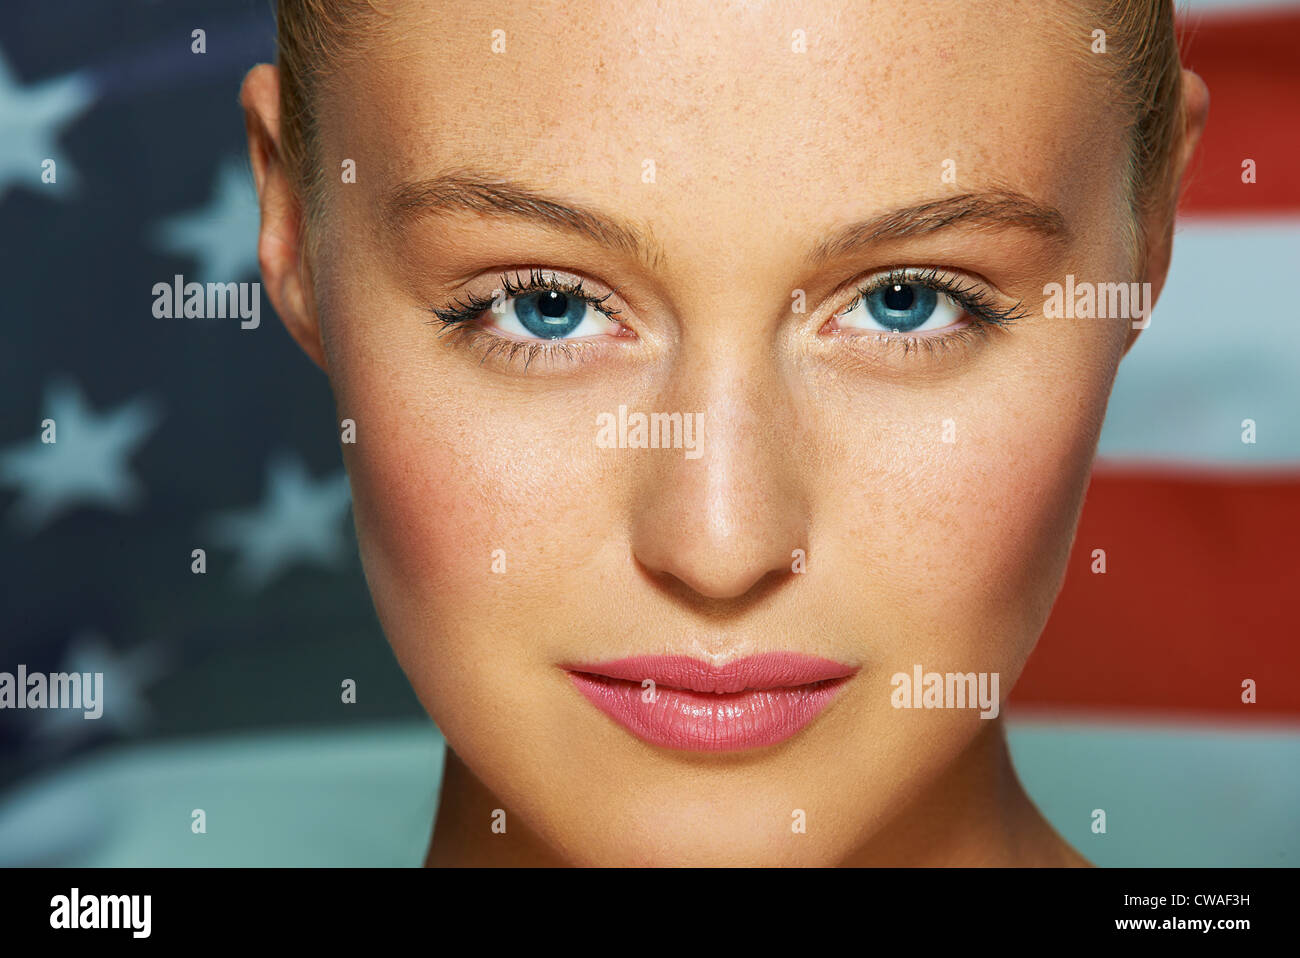 Young woman in front of USA flag Stock Photo